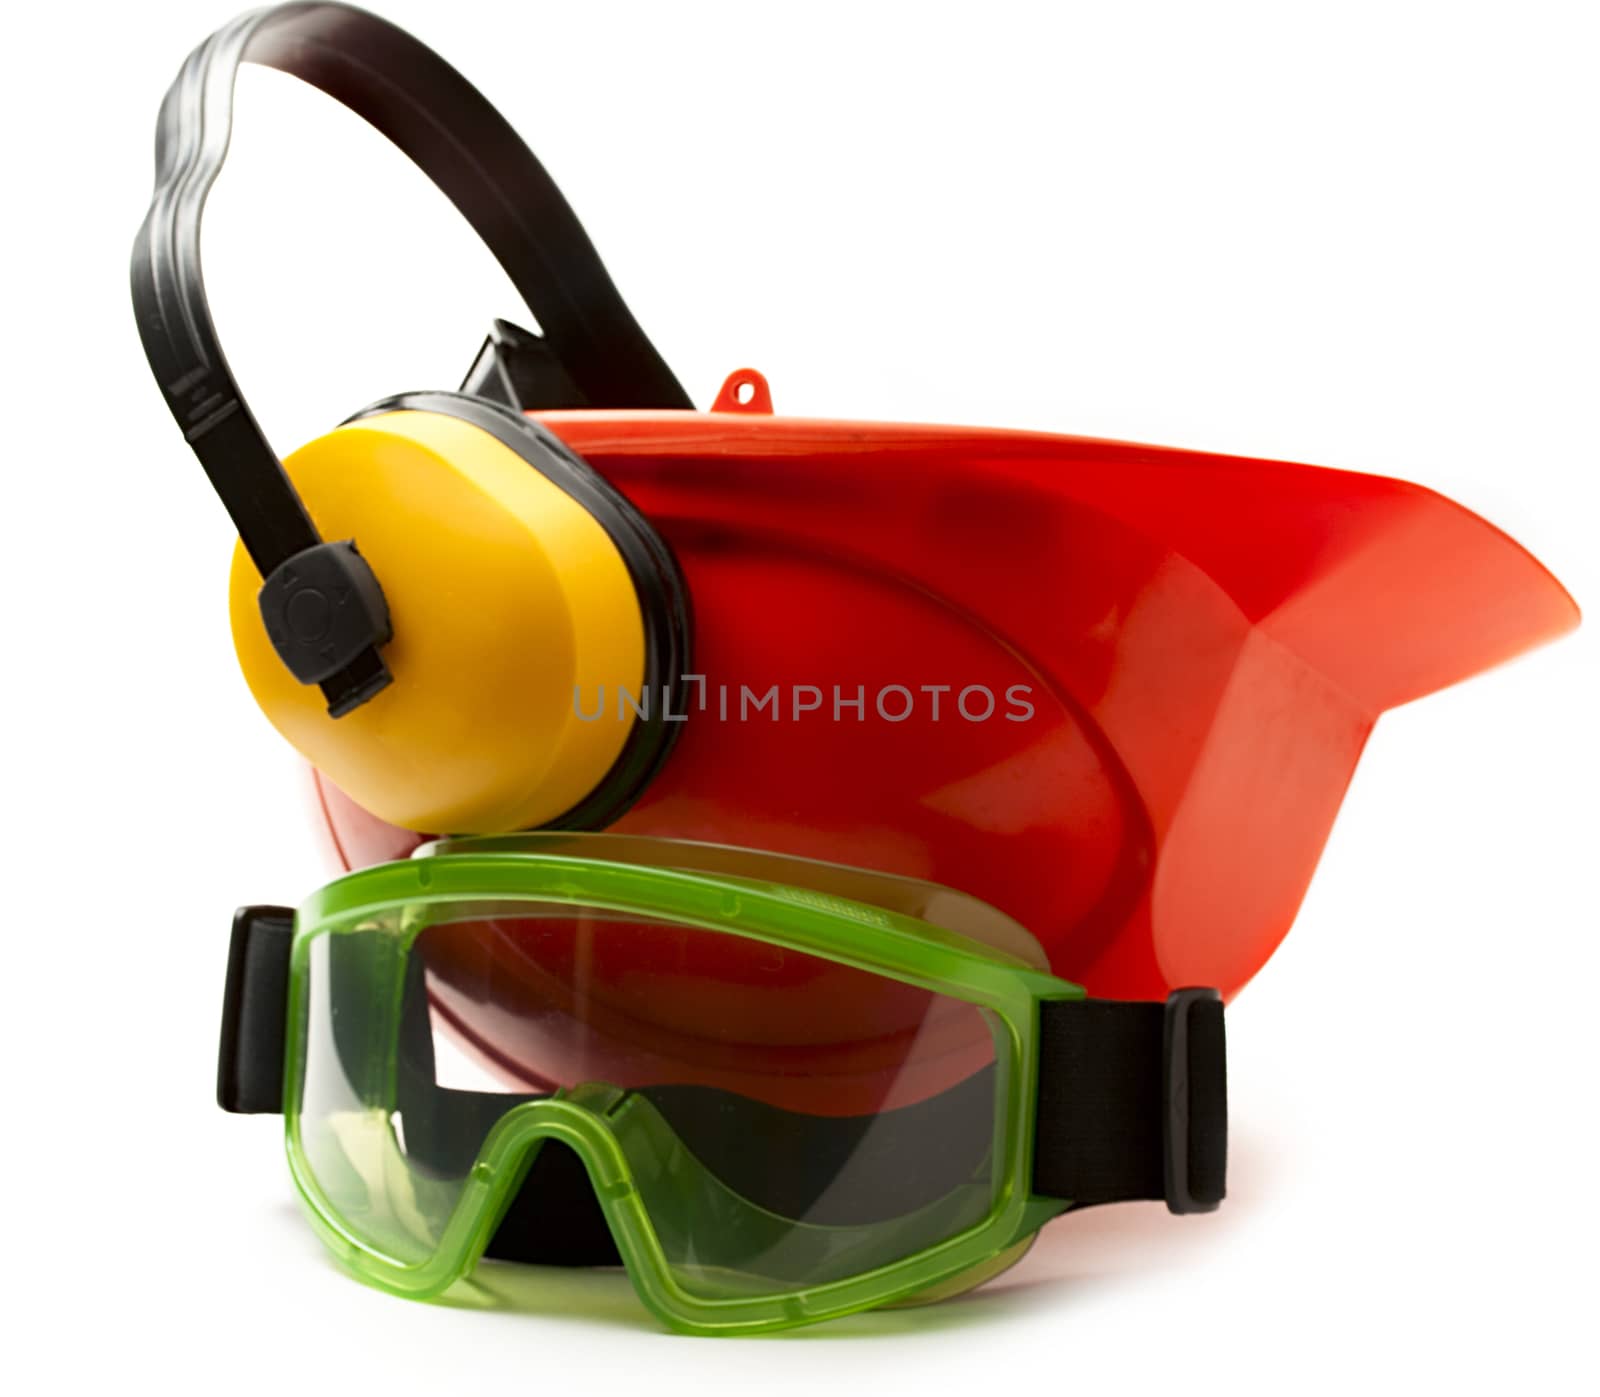 Red safety helmet with earphones and goggles by Garsya